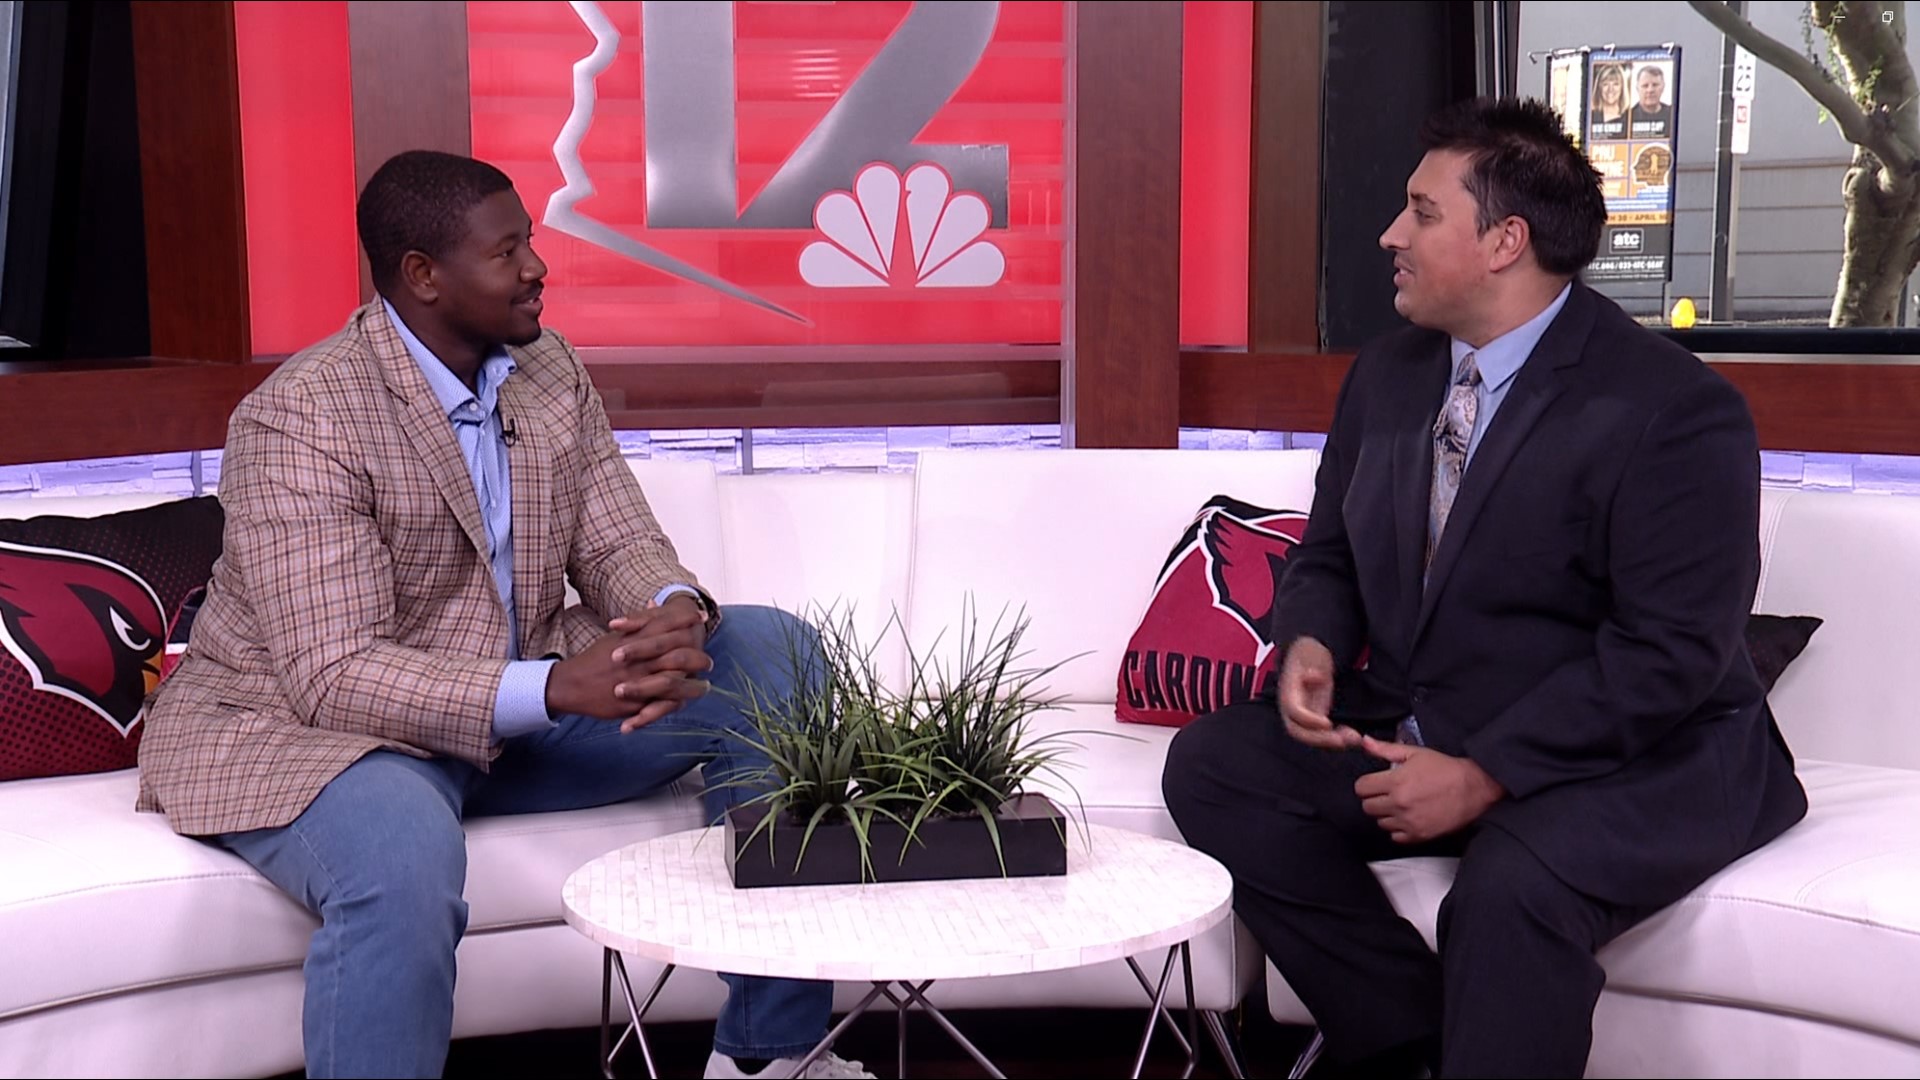 12Sports anchor Cameron Cox goes one-on-one with the Cardinals player to talk football, family and more.